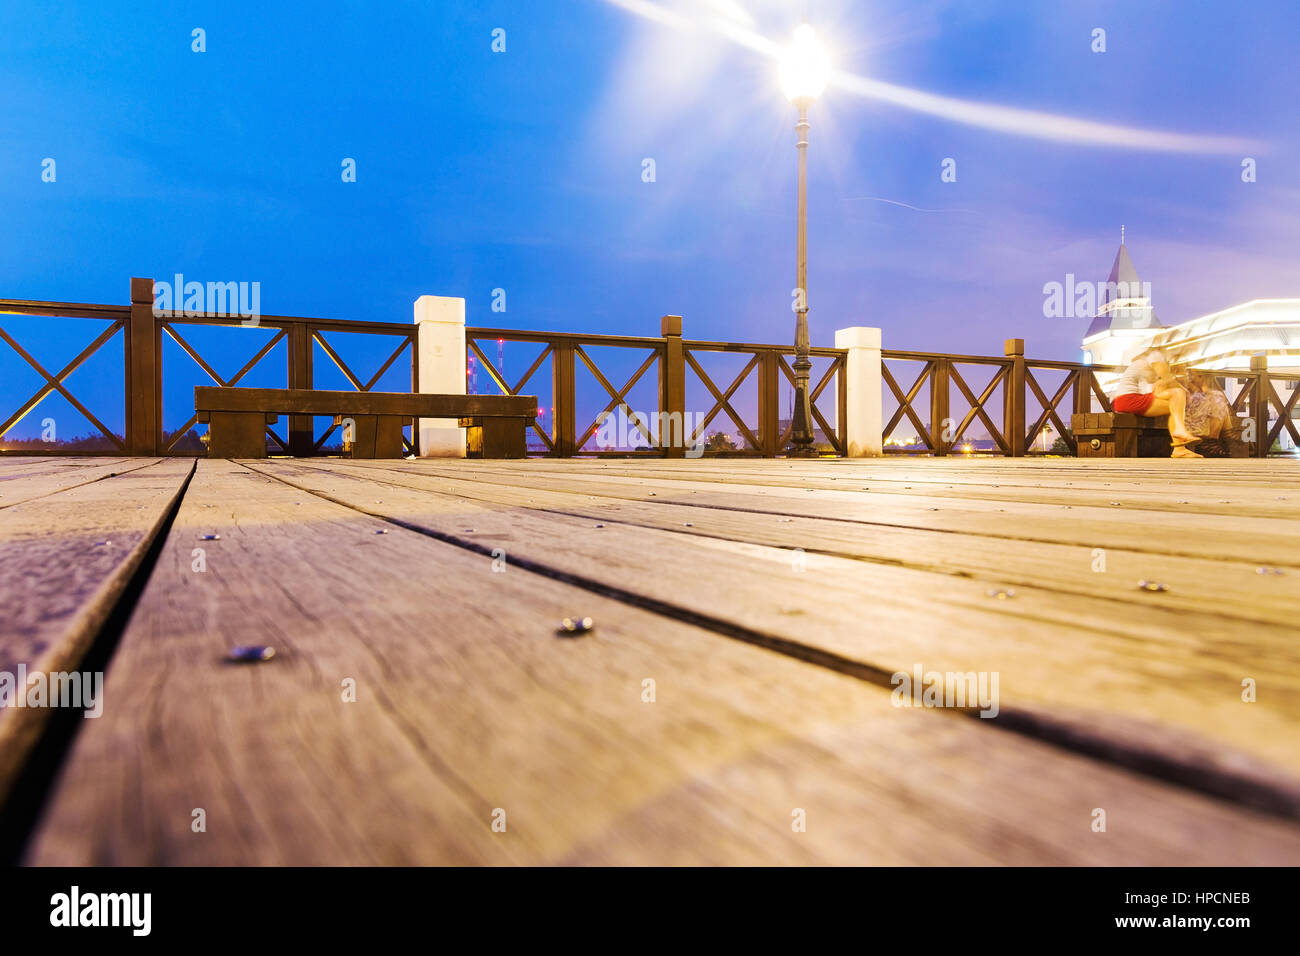 Landscape of a pier at night in Tamshui Taiwan Stock Photo